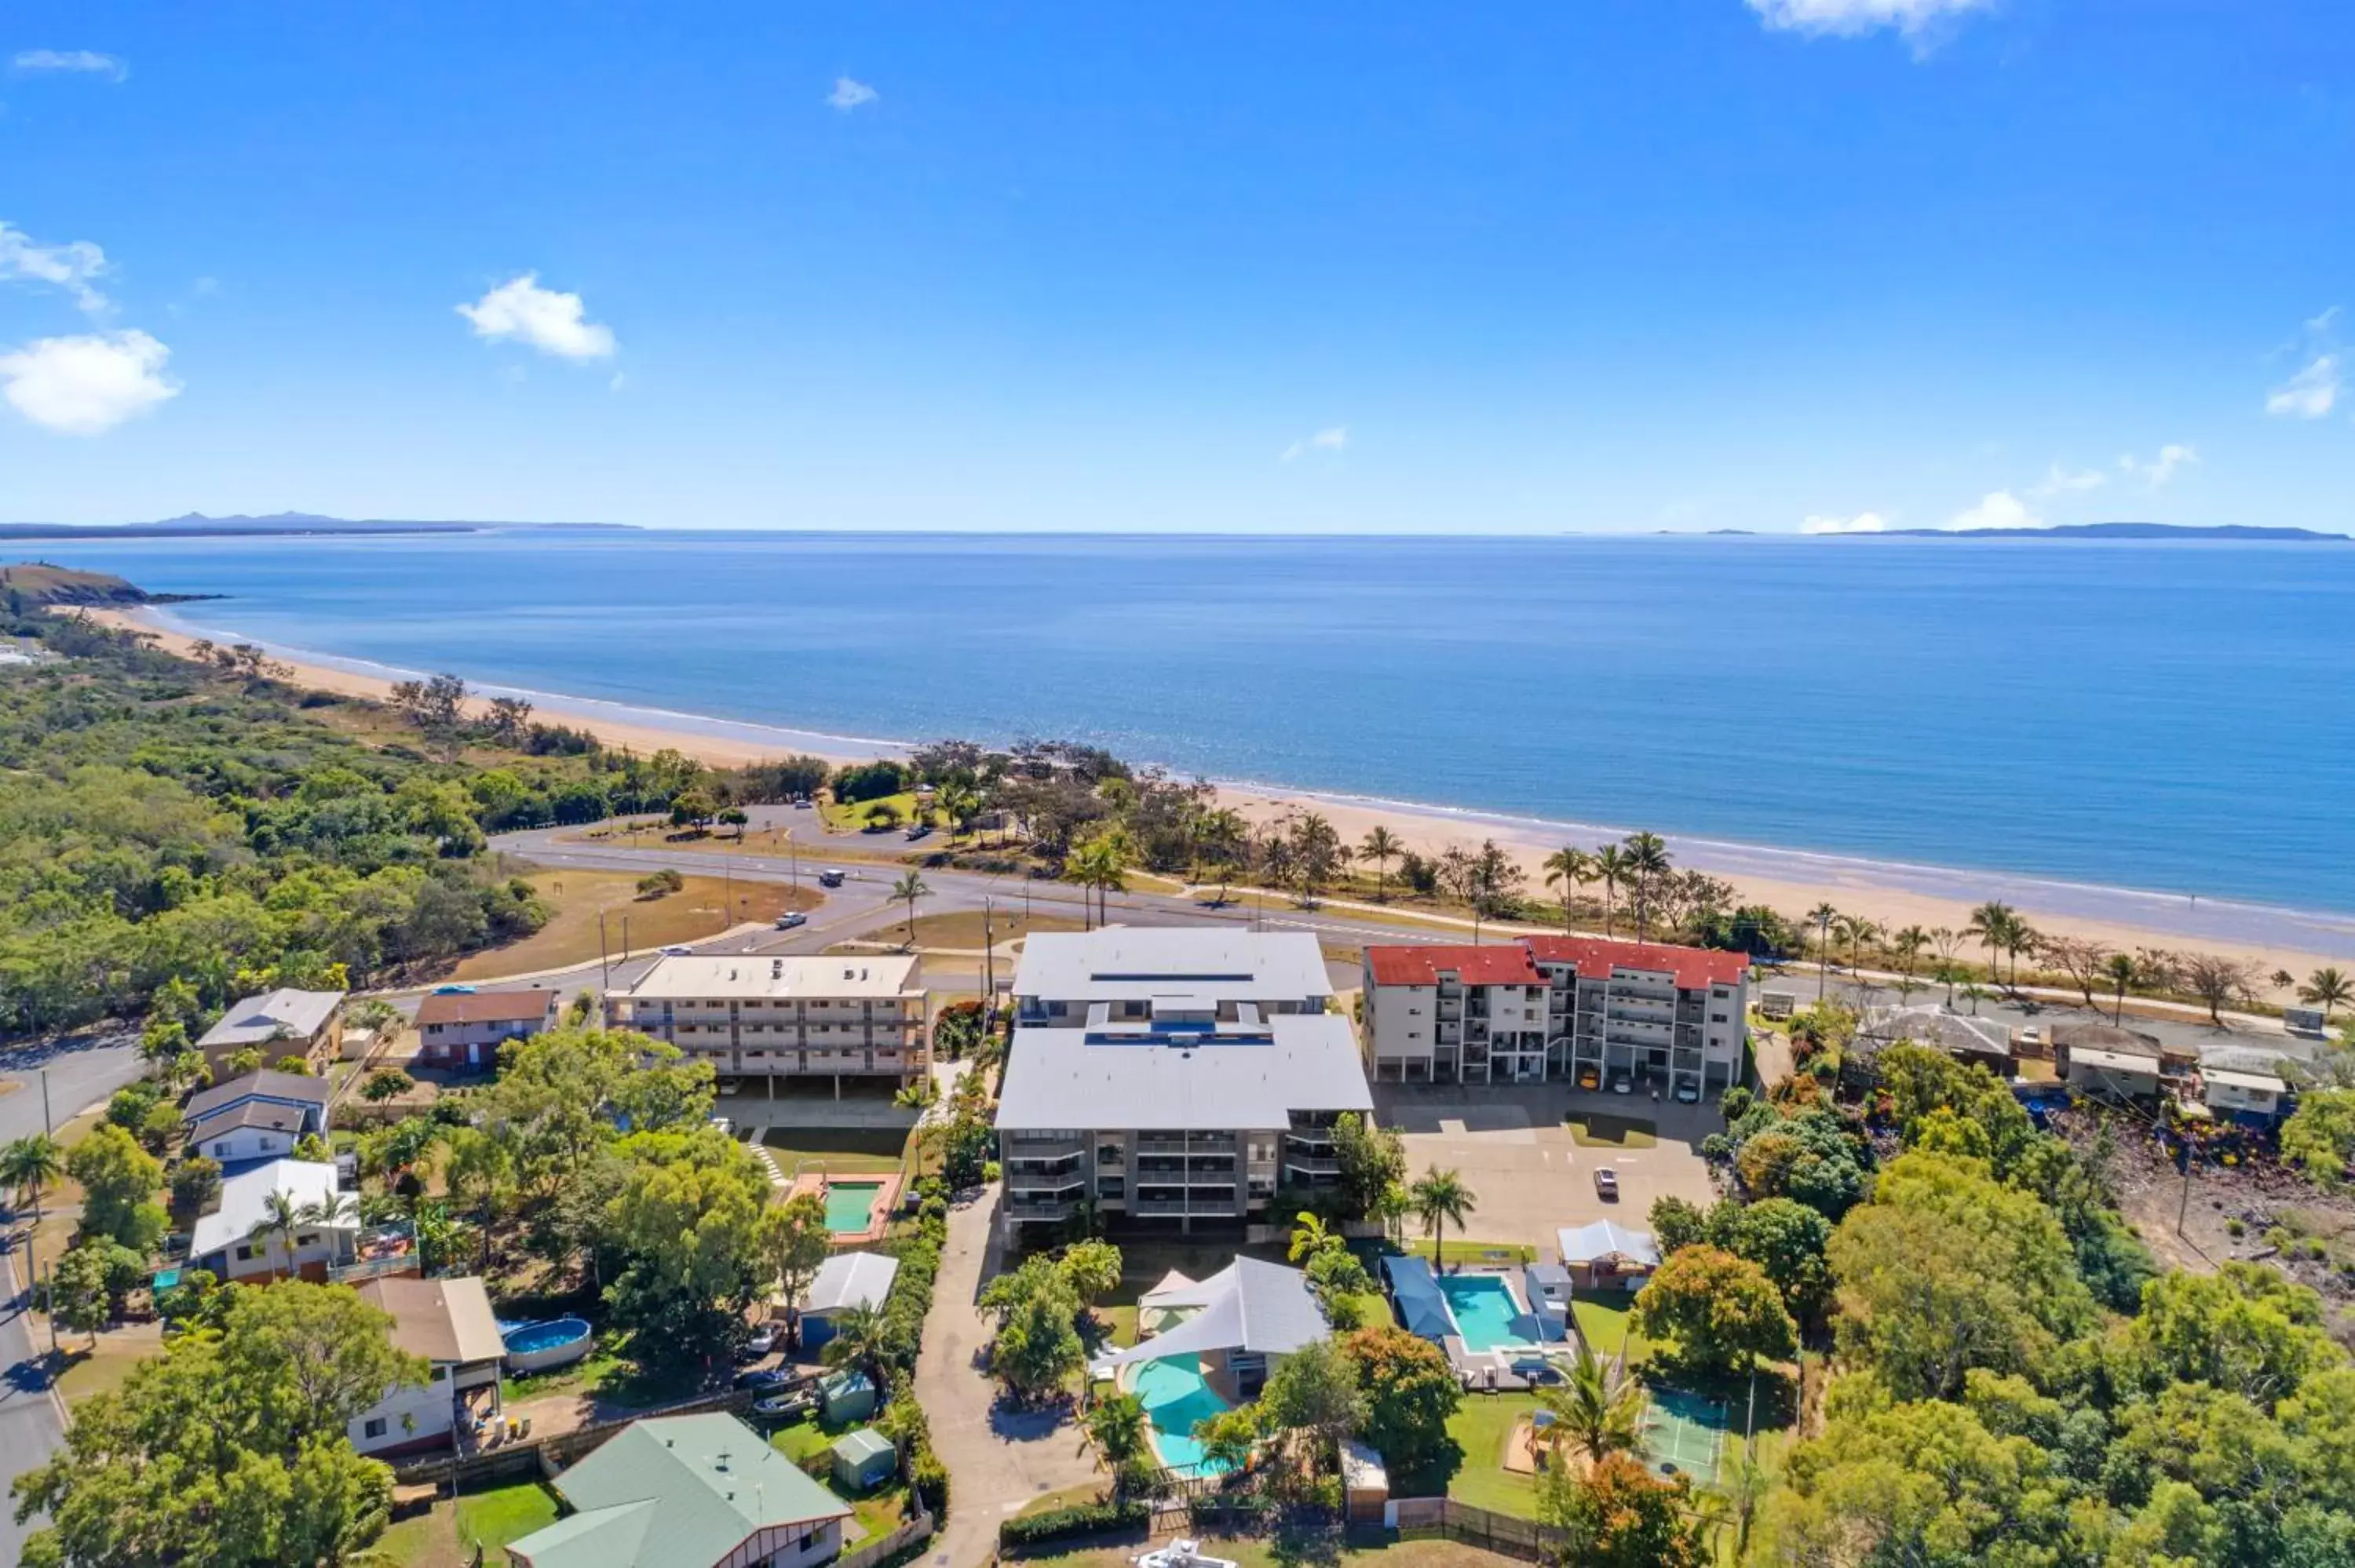 Property building, Bird's-eye View in Beaches on Lammermoor Apartments